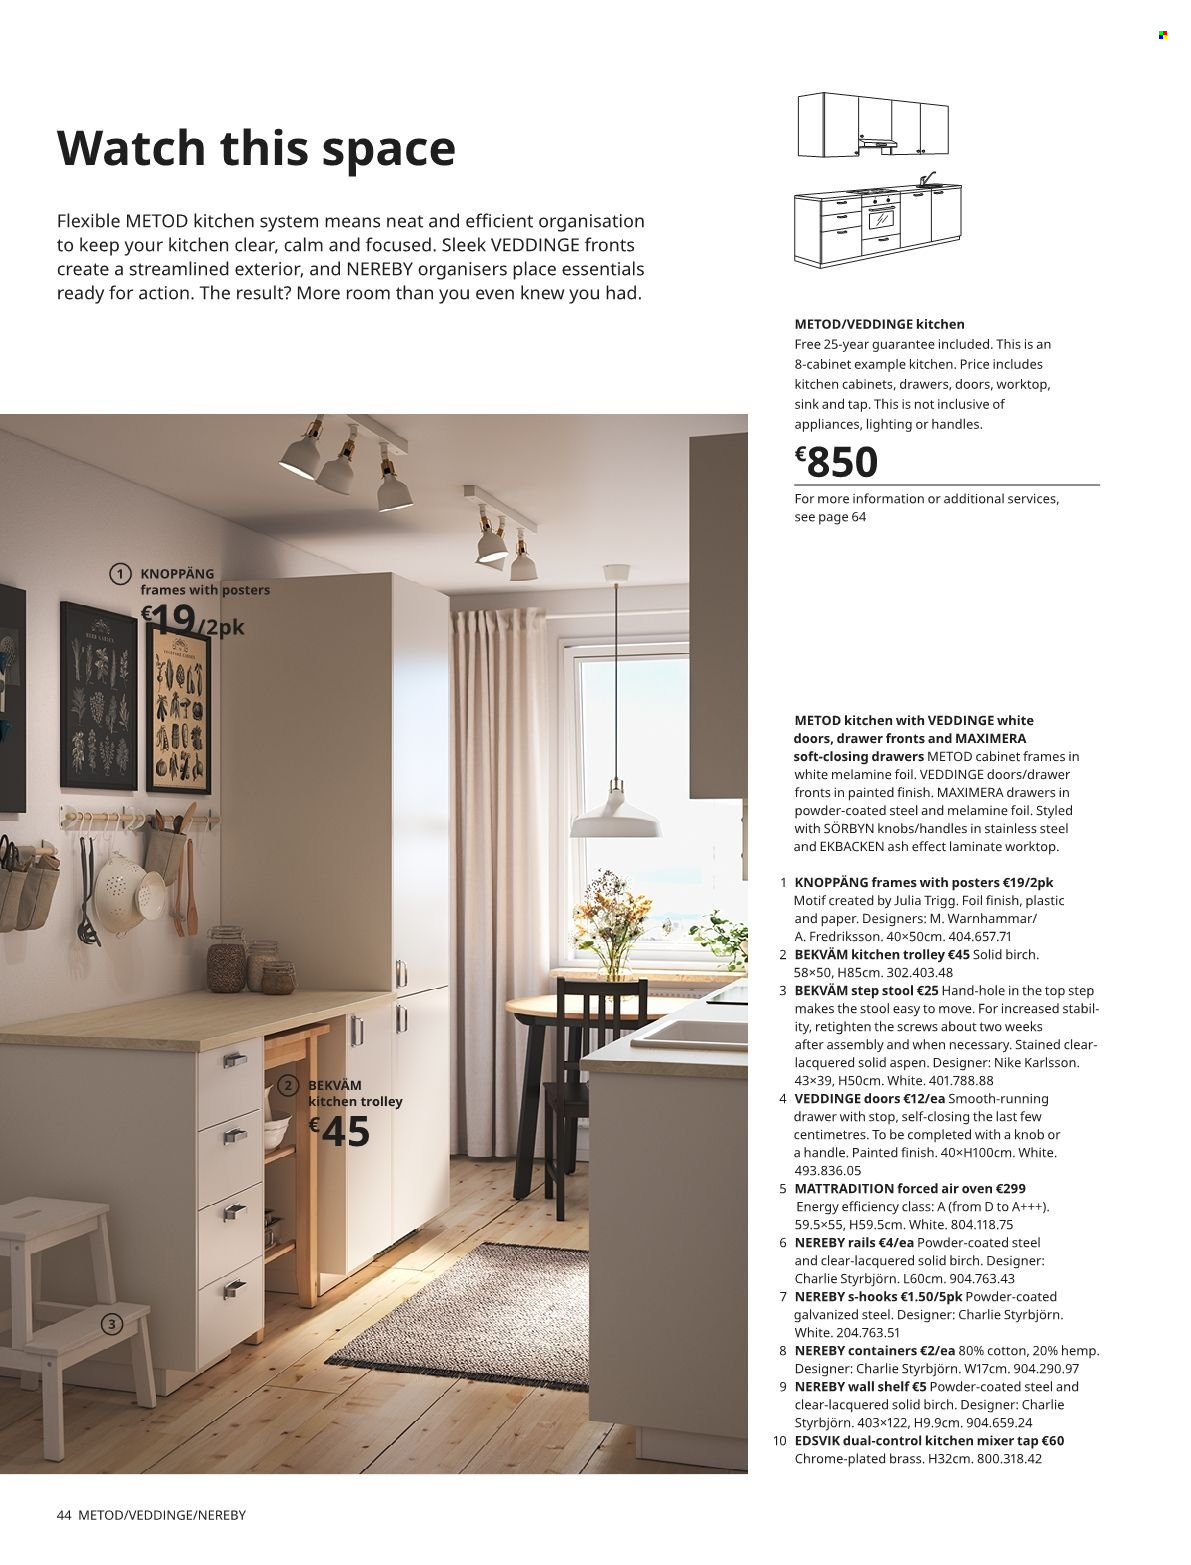 thumbnail - IKEA offer  - Sales products - cabinet, trolley, Metod, kitchen cabinet, stool, drawer fronts, wall shelf, sink, kitchen mixer, oven, step stool, mixer tap. Page 44.